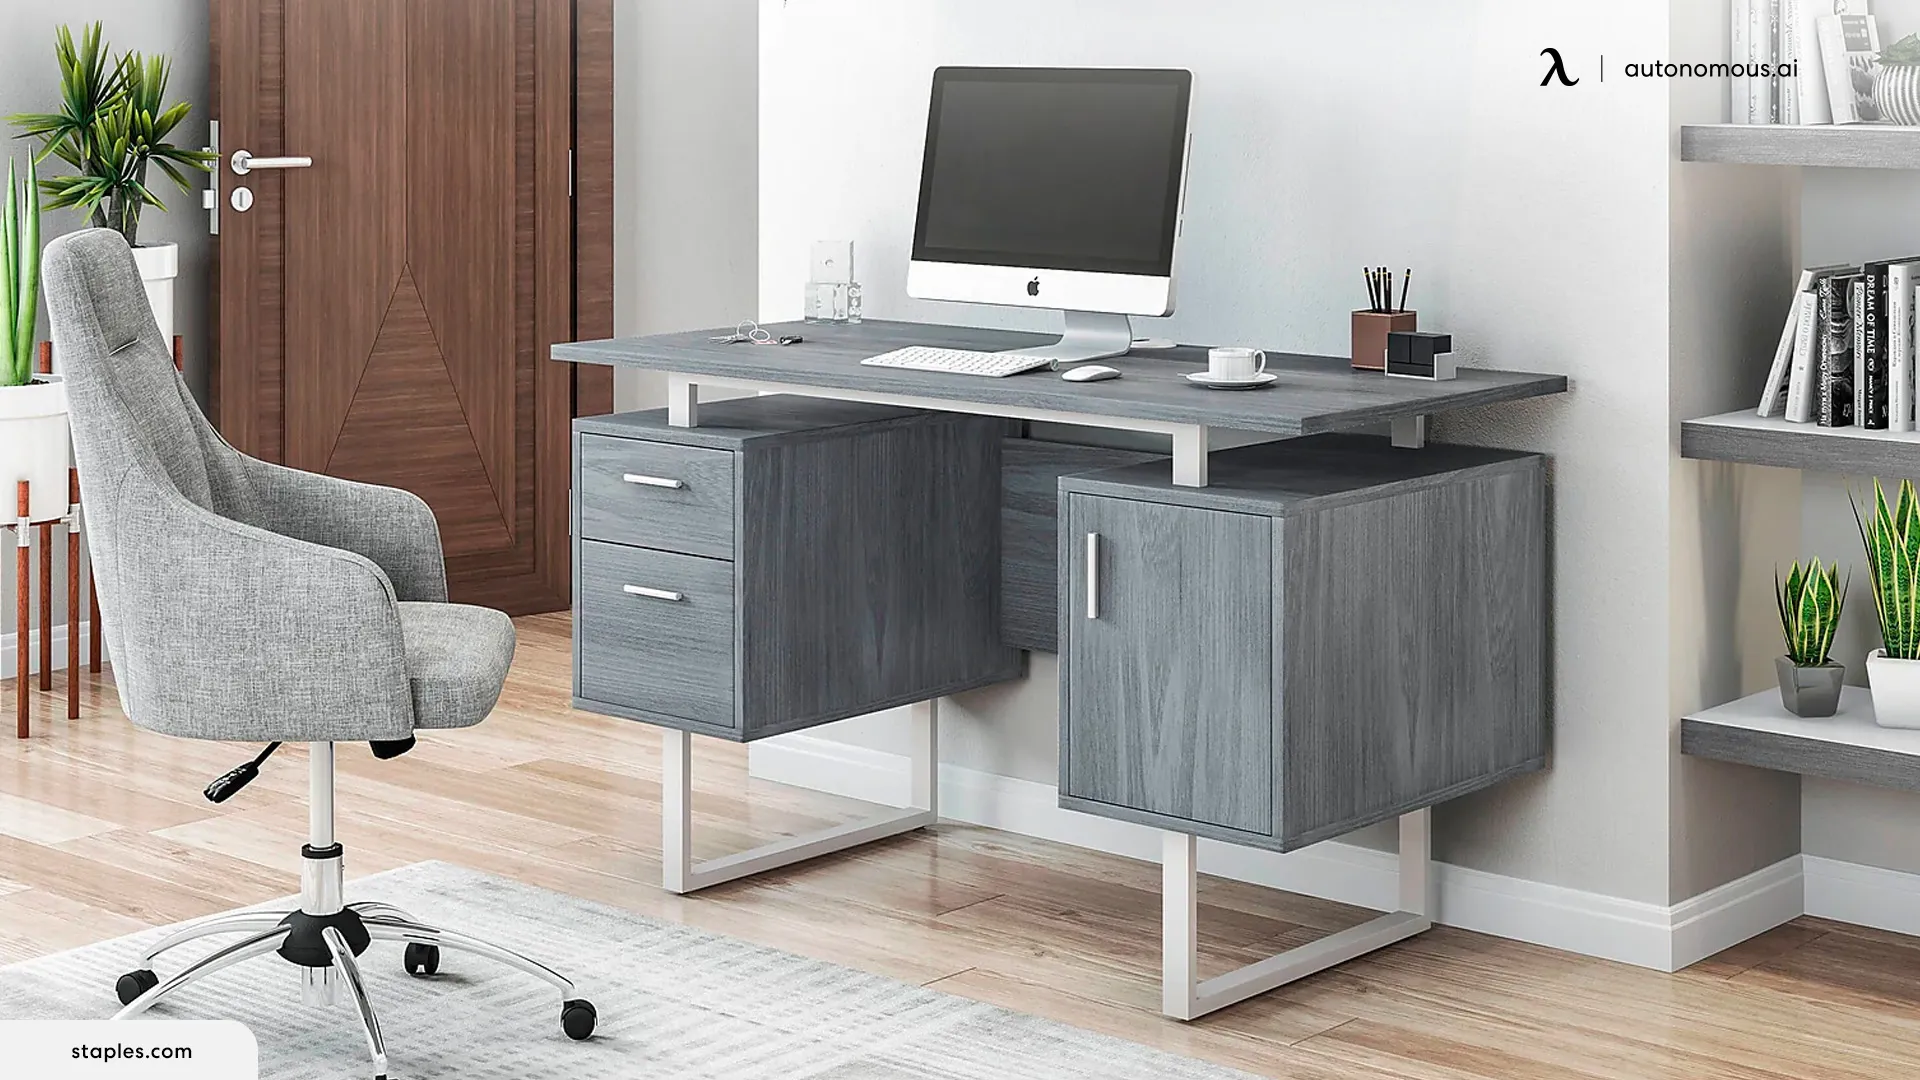 Staples wholesale furniture in Mississauga